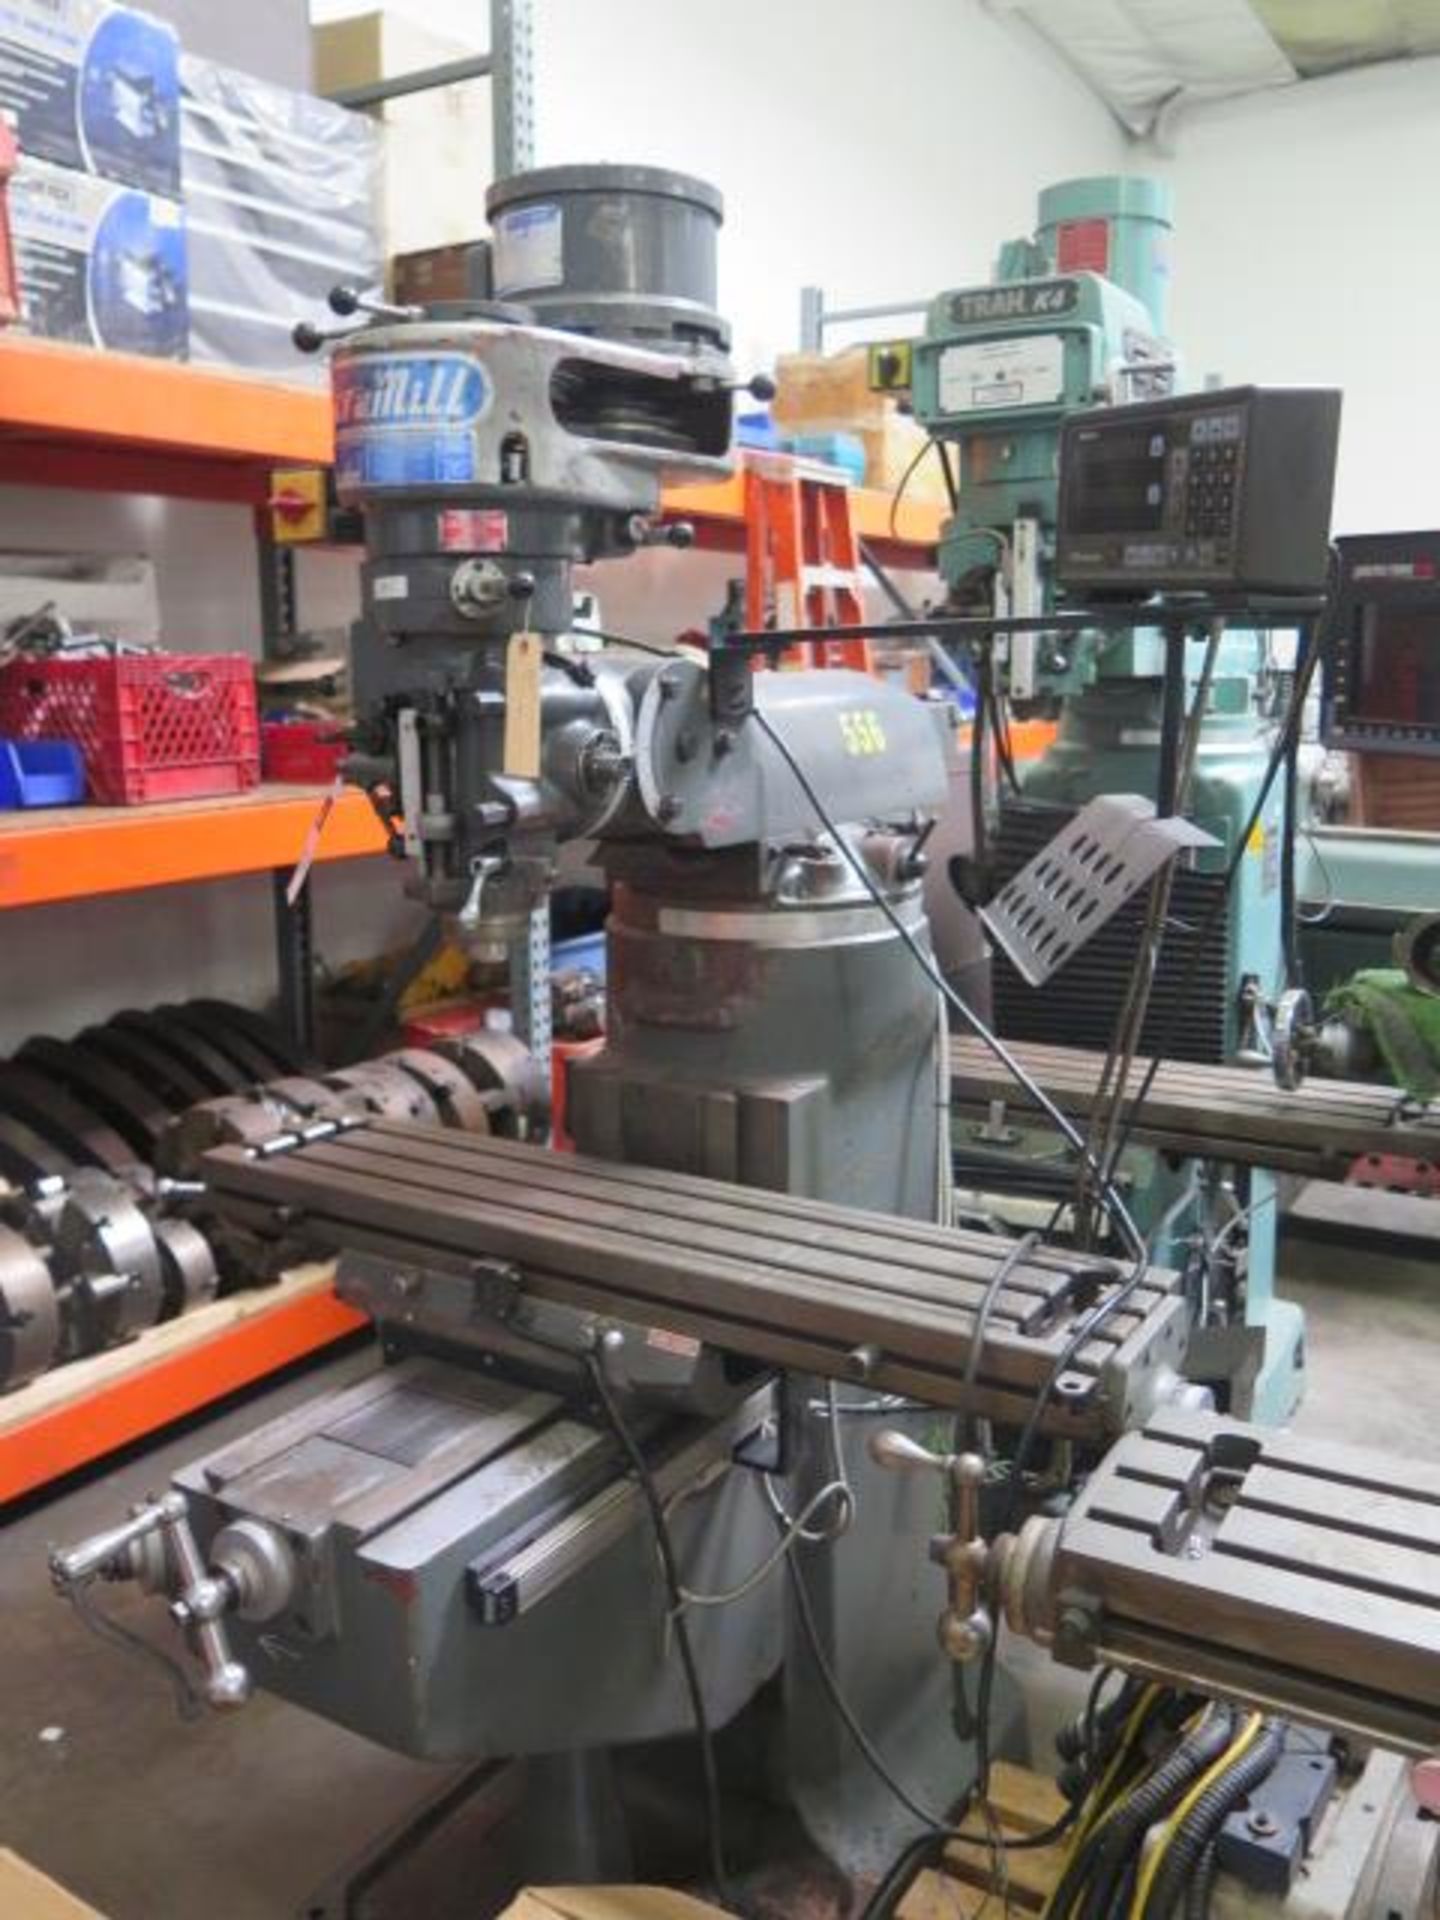 Acra Mill Vertical Mill s/n 504689 w/ Mitutoyo KS Counter Programmable DRO, 2Hp Motor, 80-5440 - Image 2 of 12